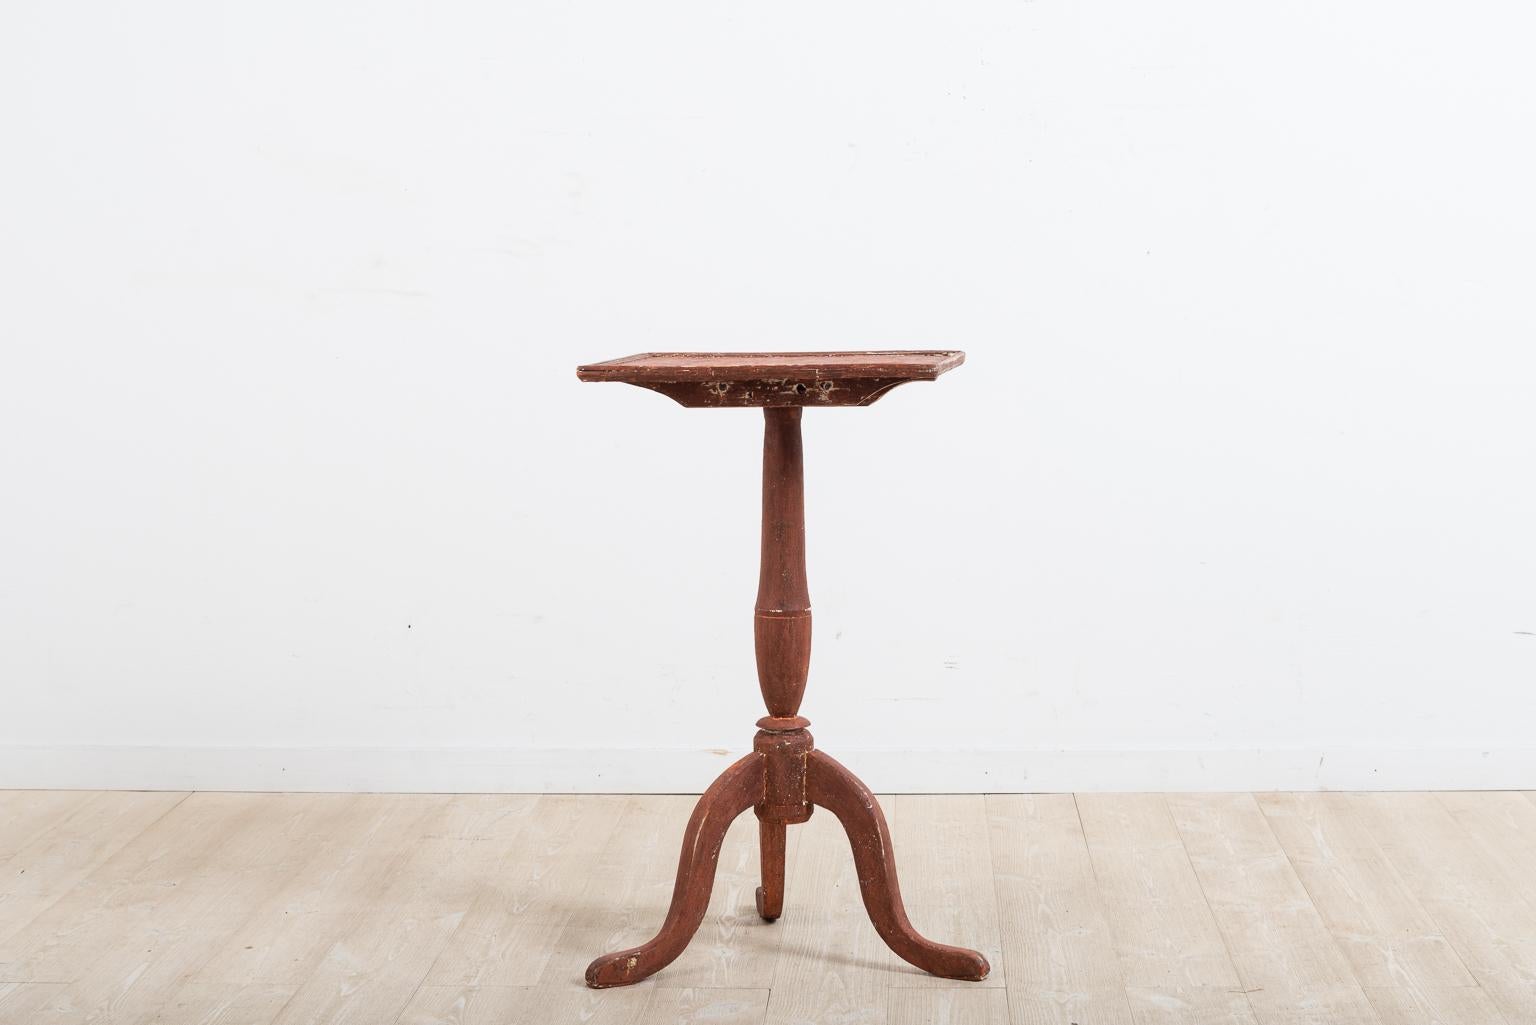 Hand-Crafted Late 18th Century Swedish Gustavian Pedestal Table